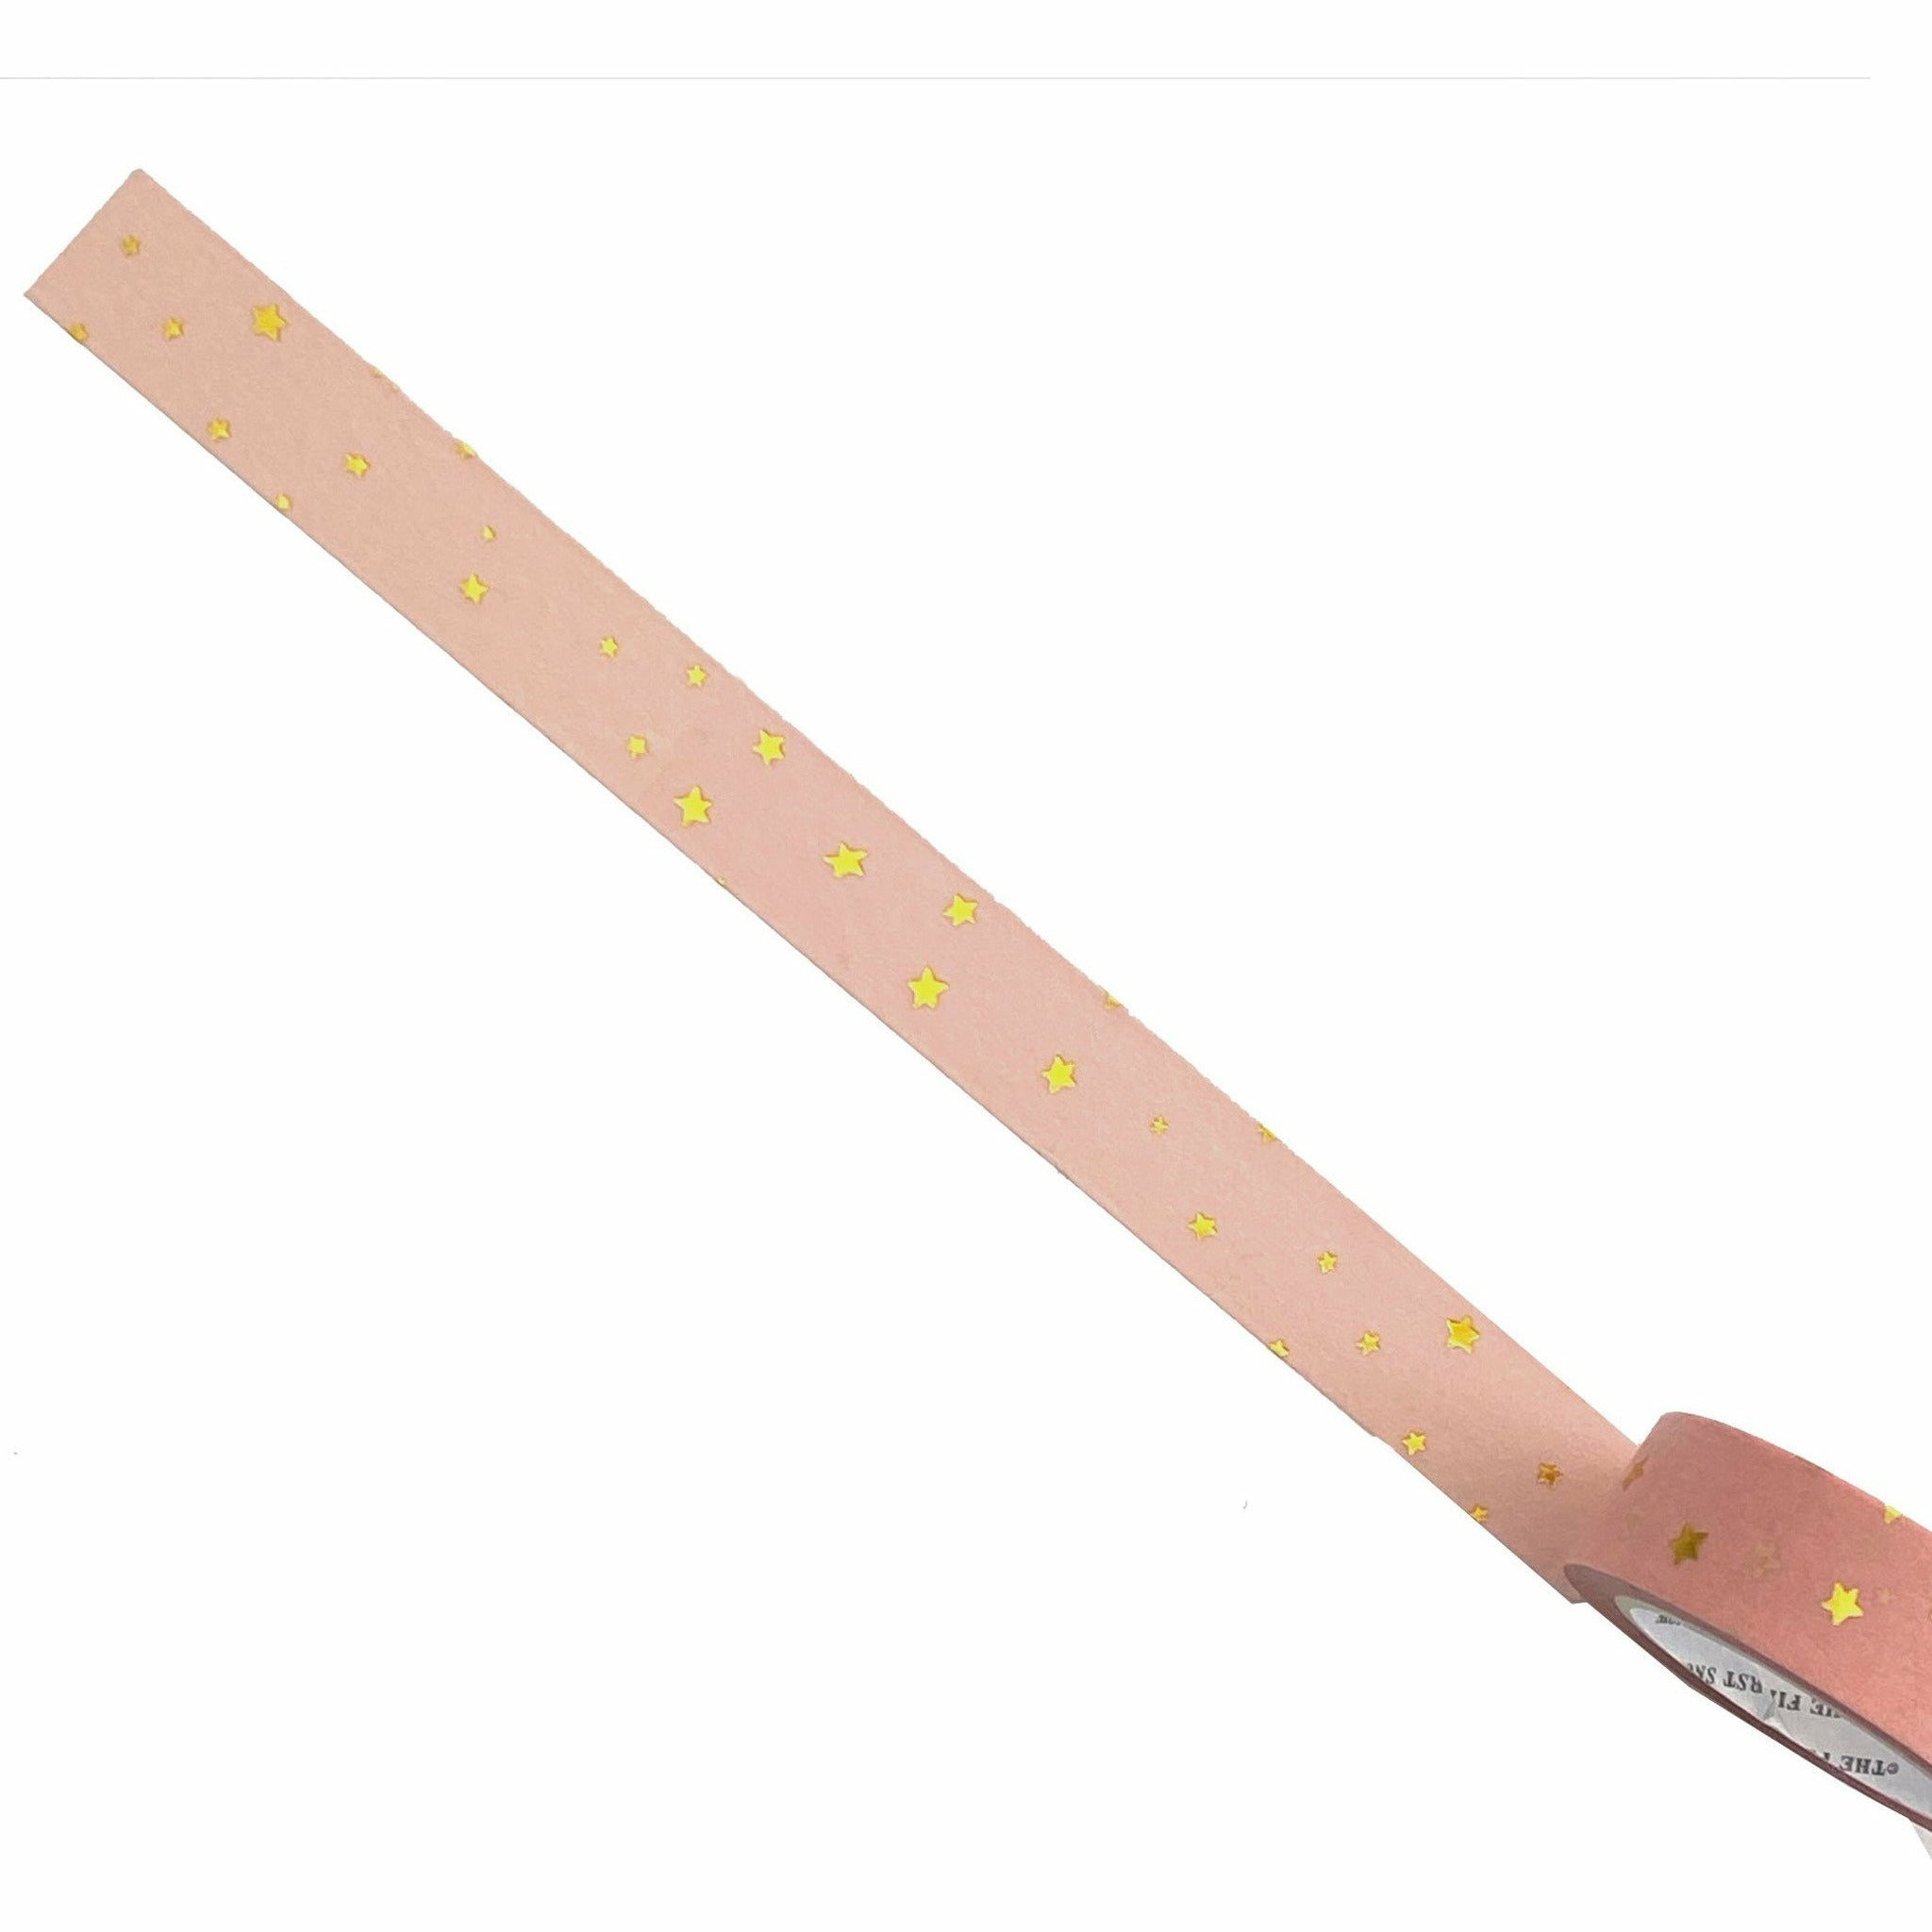 Fun Peach Pink Washi Tape with Metallic Golden Star Pattern - The First Snow